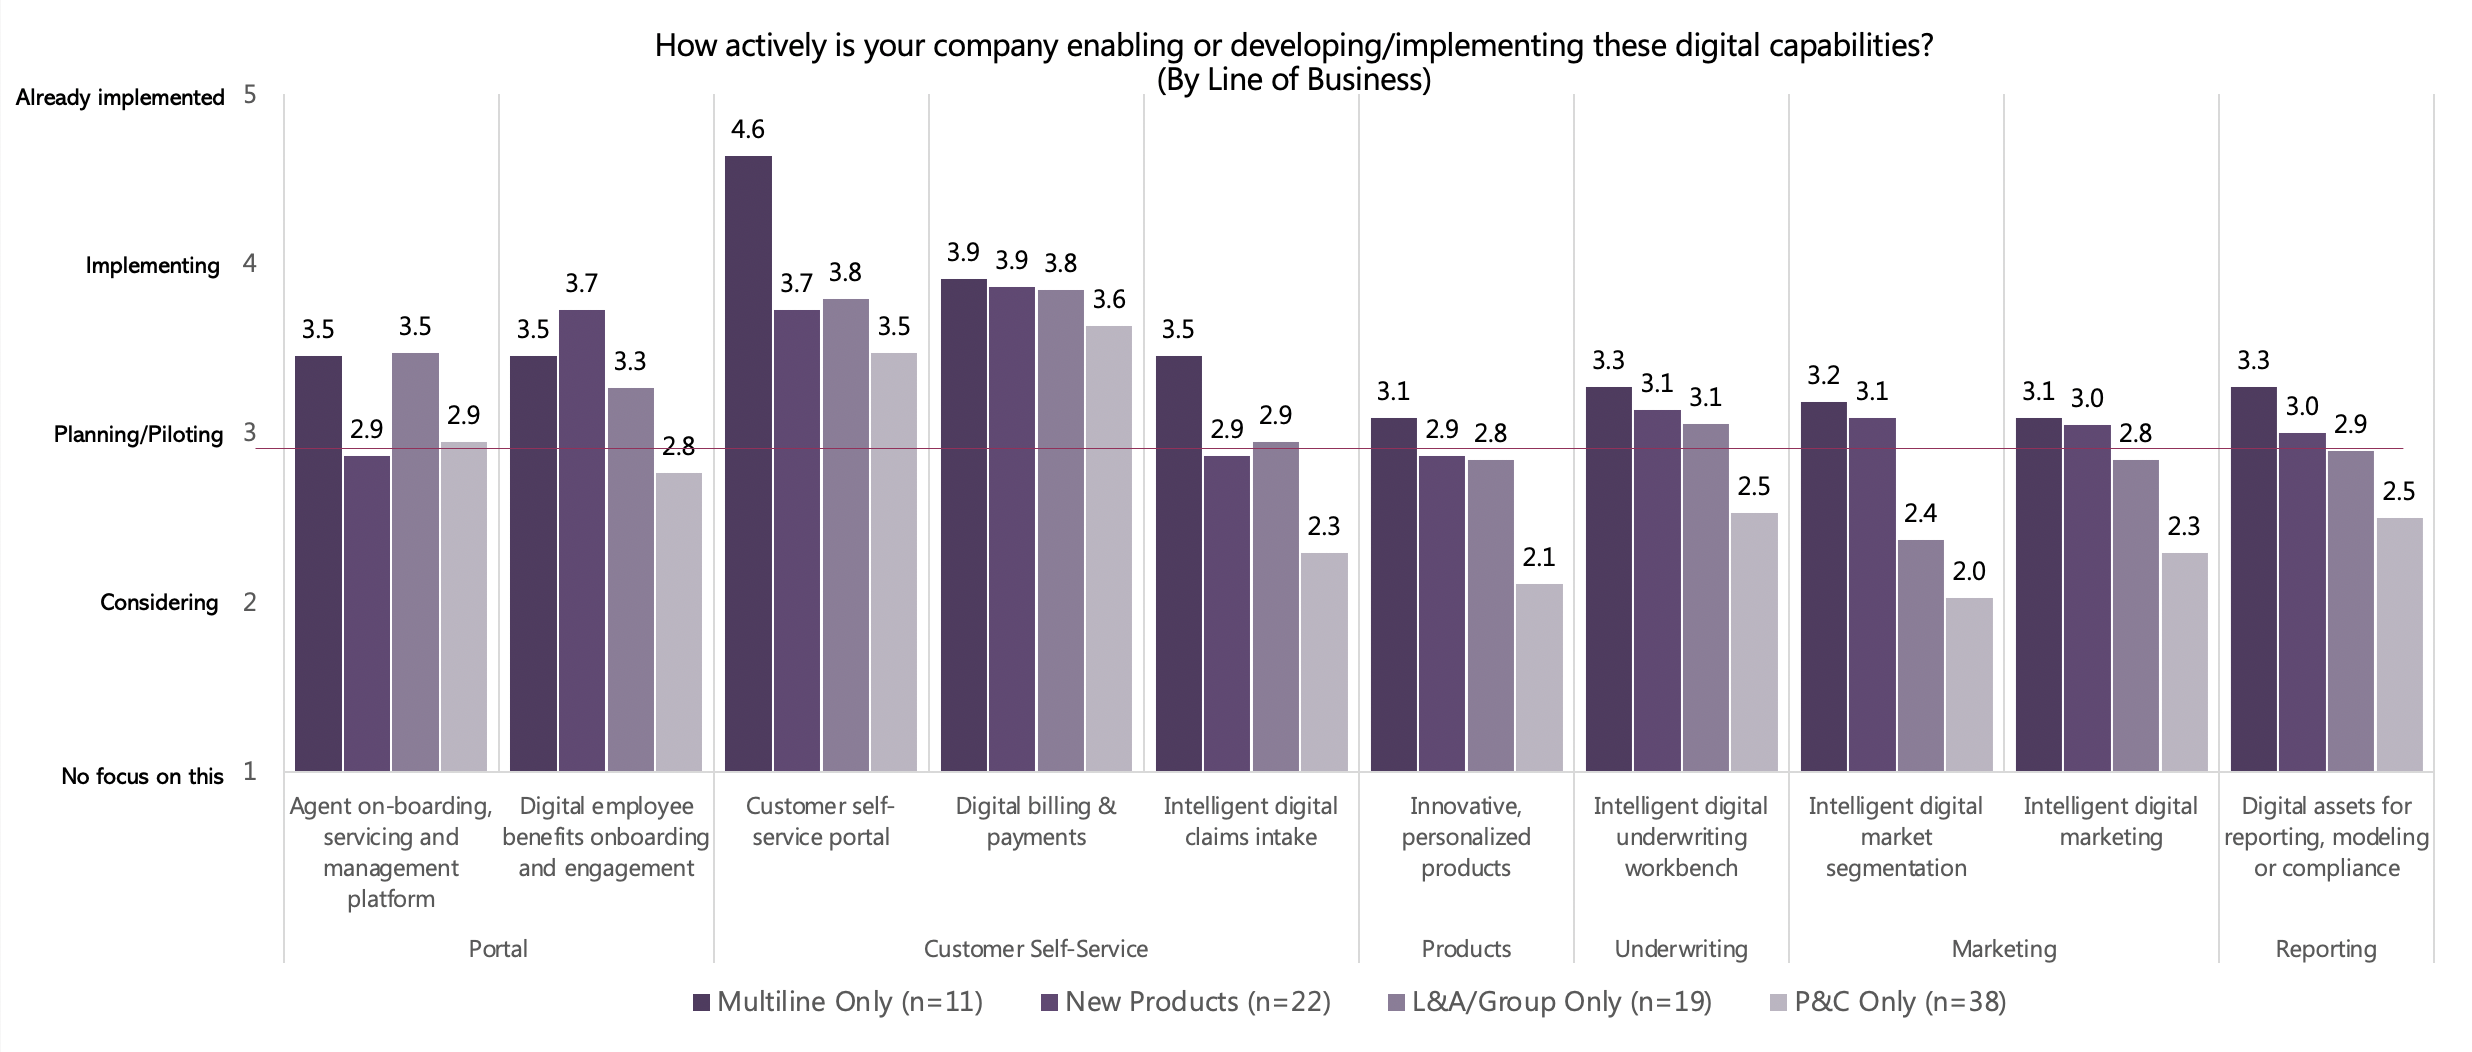 Insurers' levels of activity in adding digital capabilities by lines of business